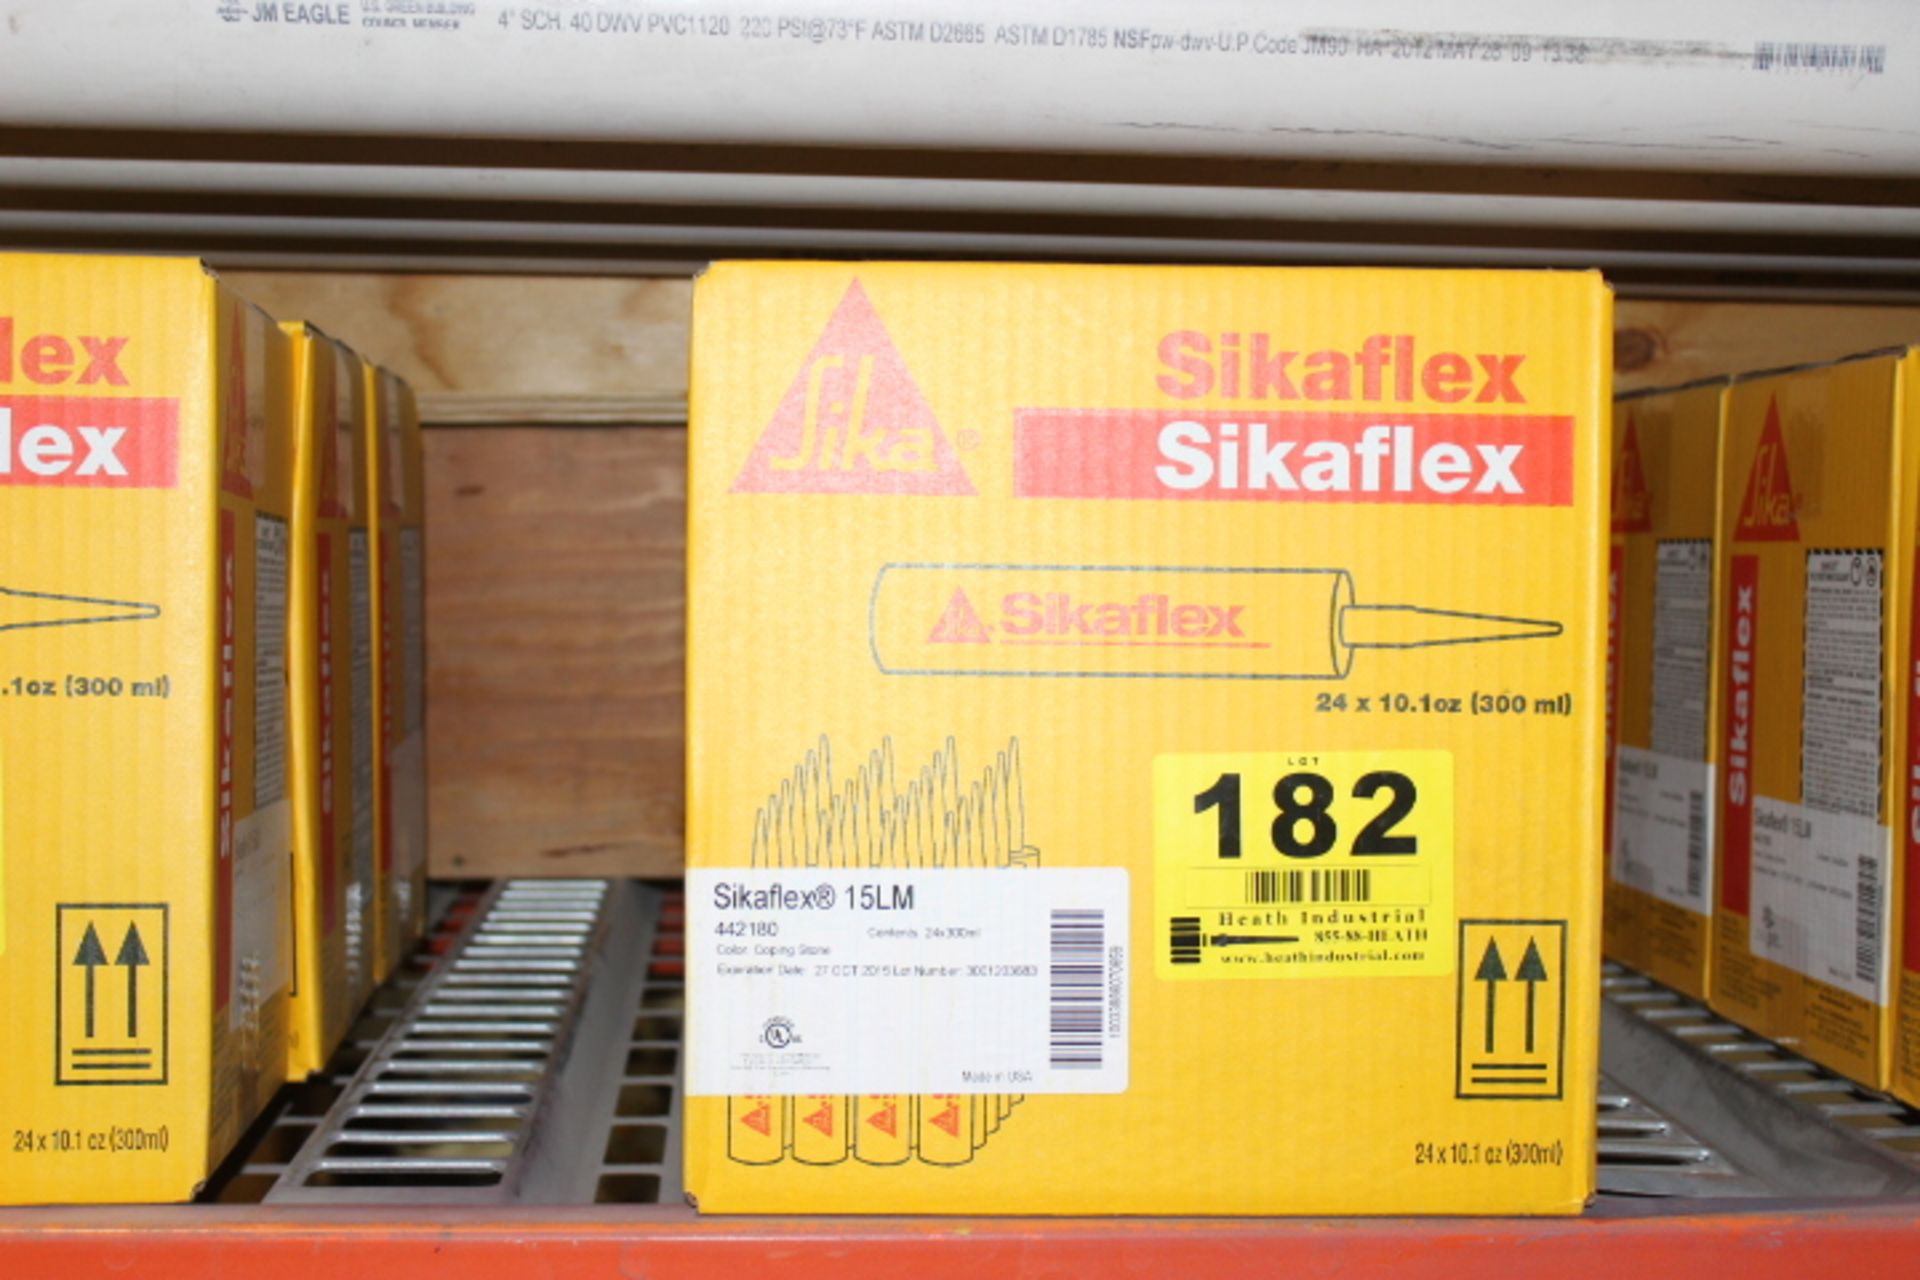 BOXES OF 24-COUNT SIKA SILKAFLEX COPING STONE SEALANT